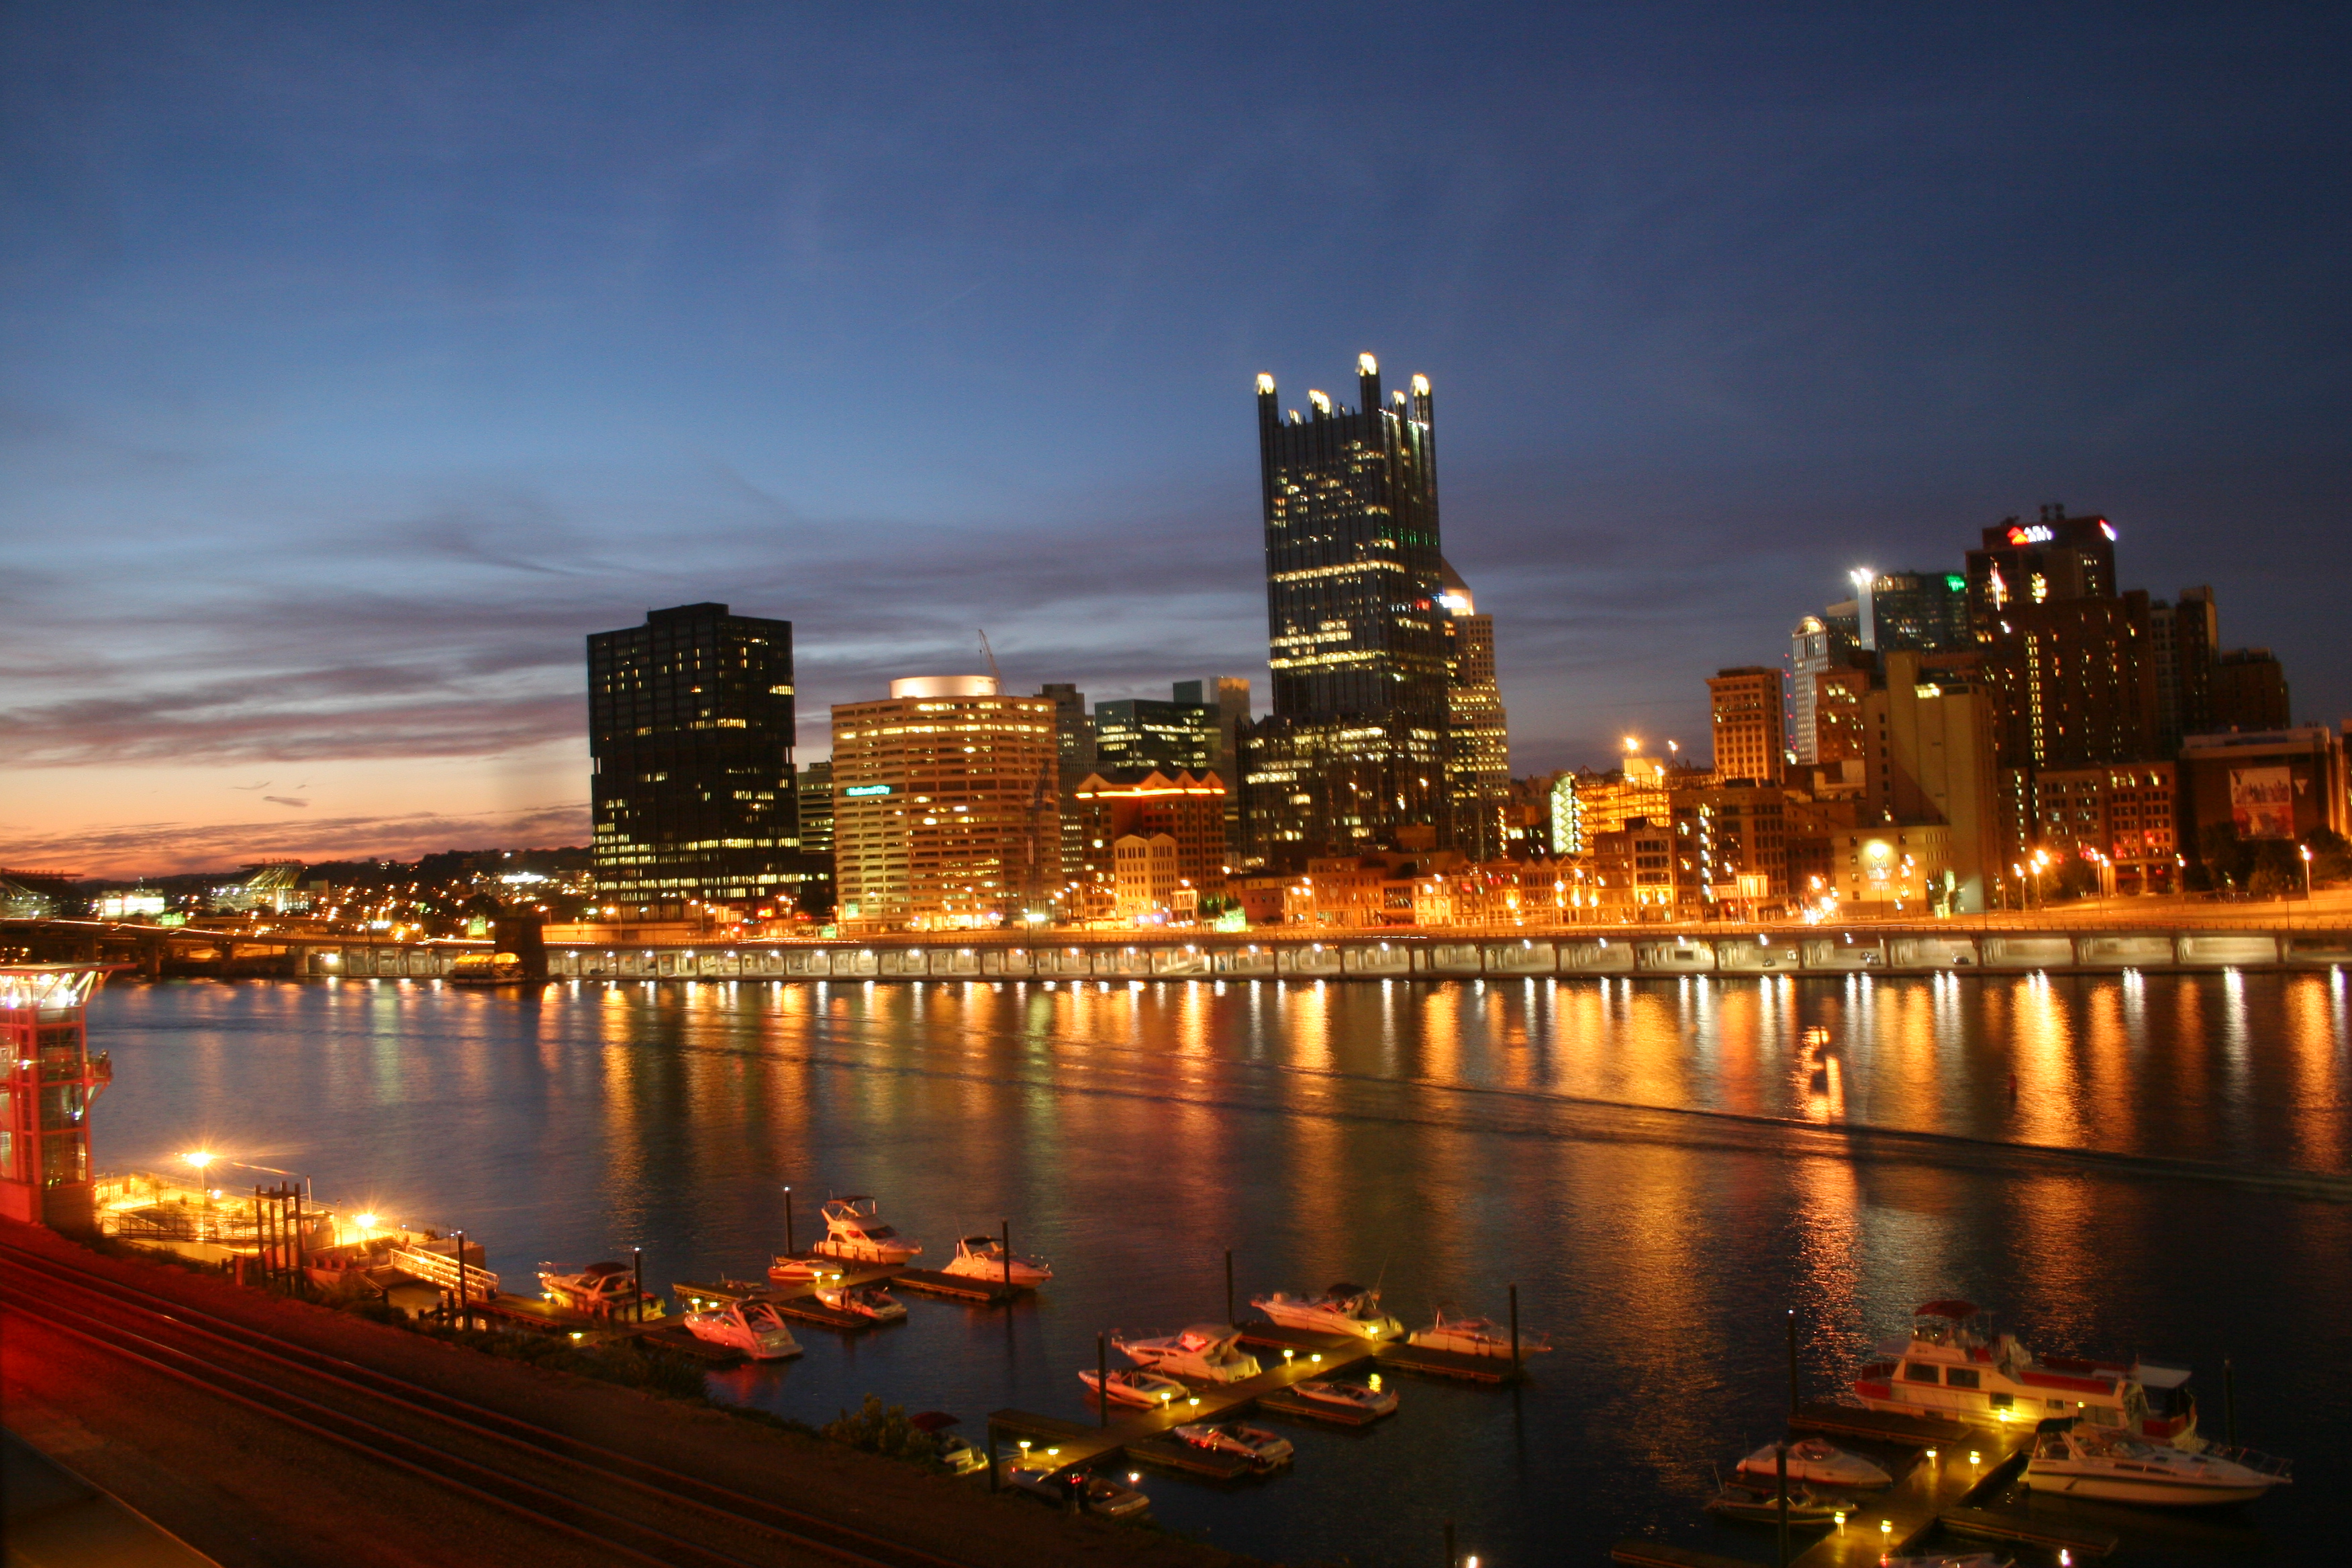 pittsburgh wallpapers hd 16285 images pittsburgh wallpapers hd 16285